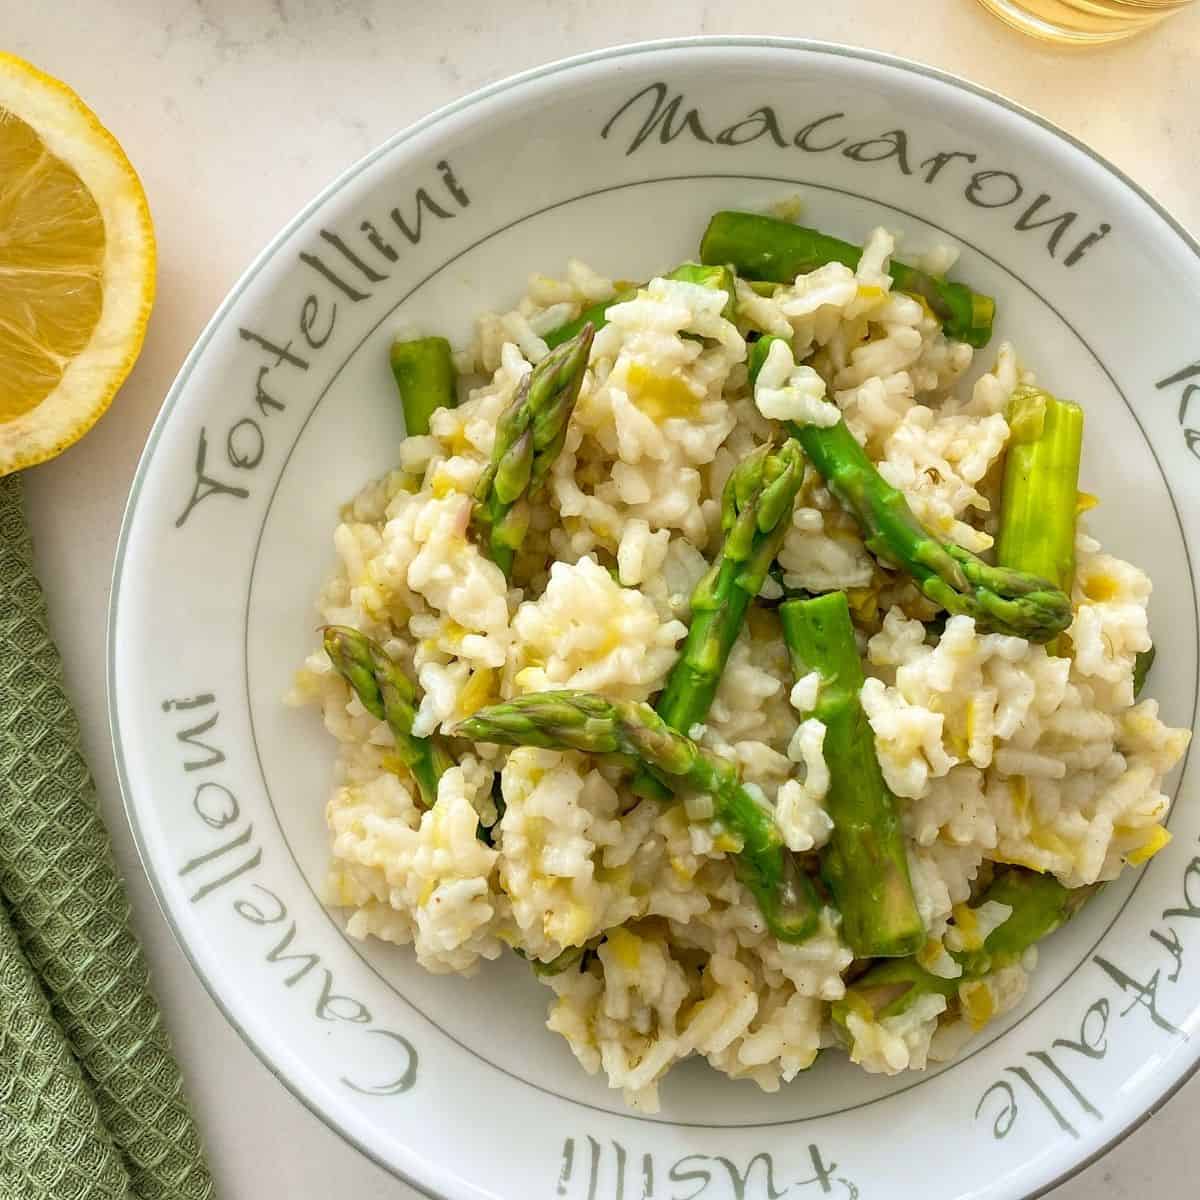 Risotto with asparagus in round bowl with lemon on the side.